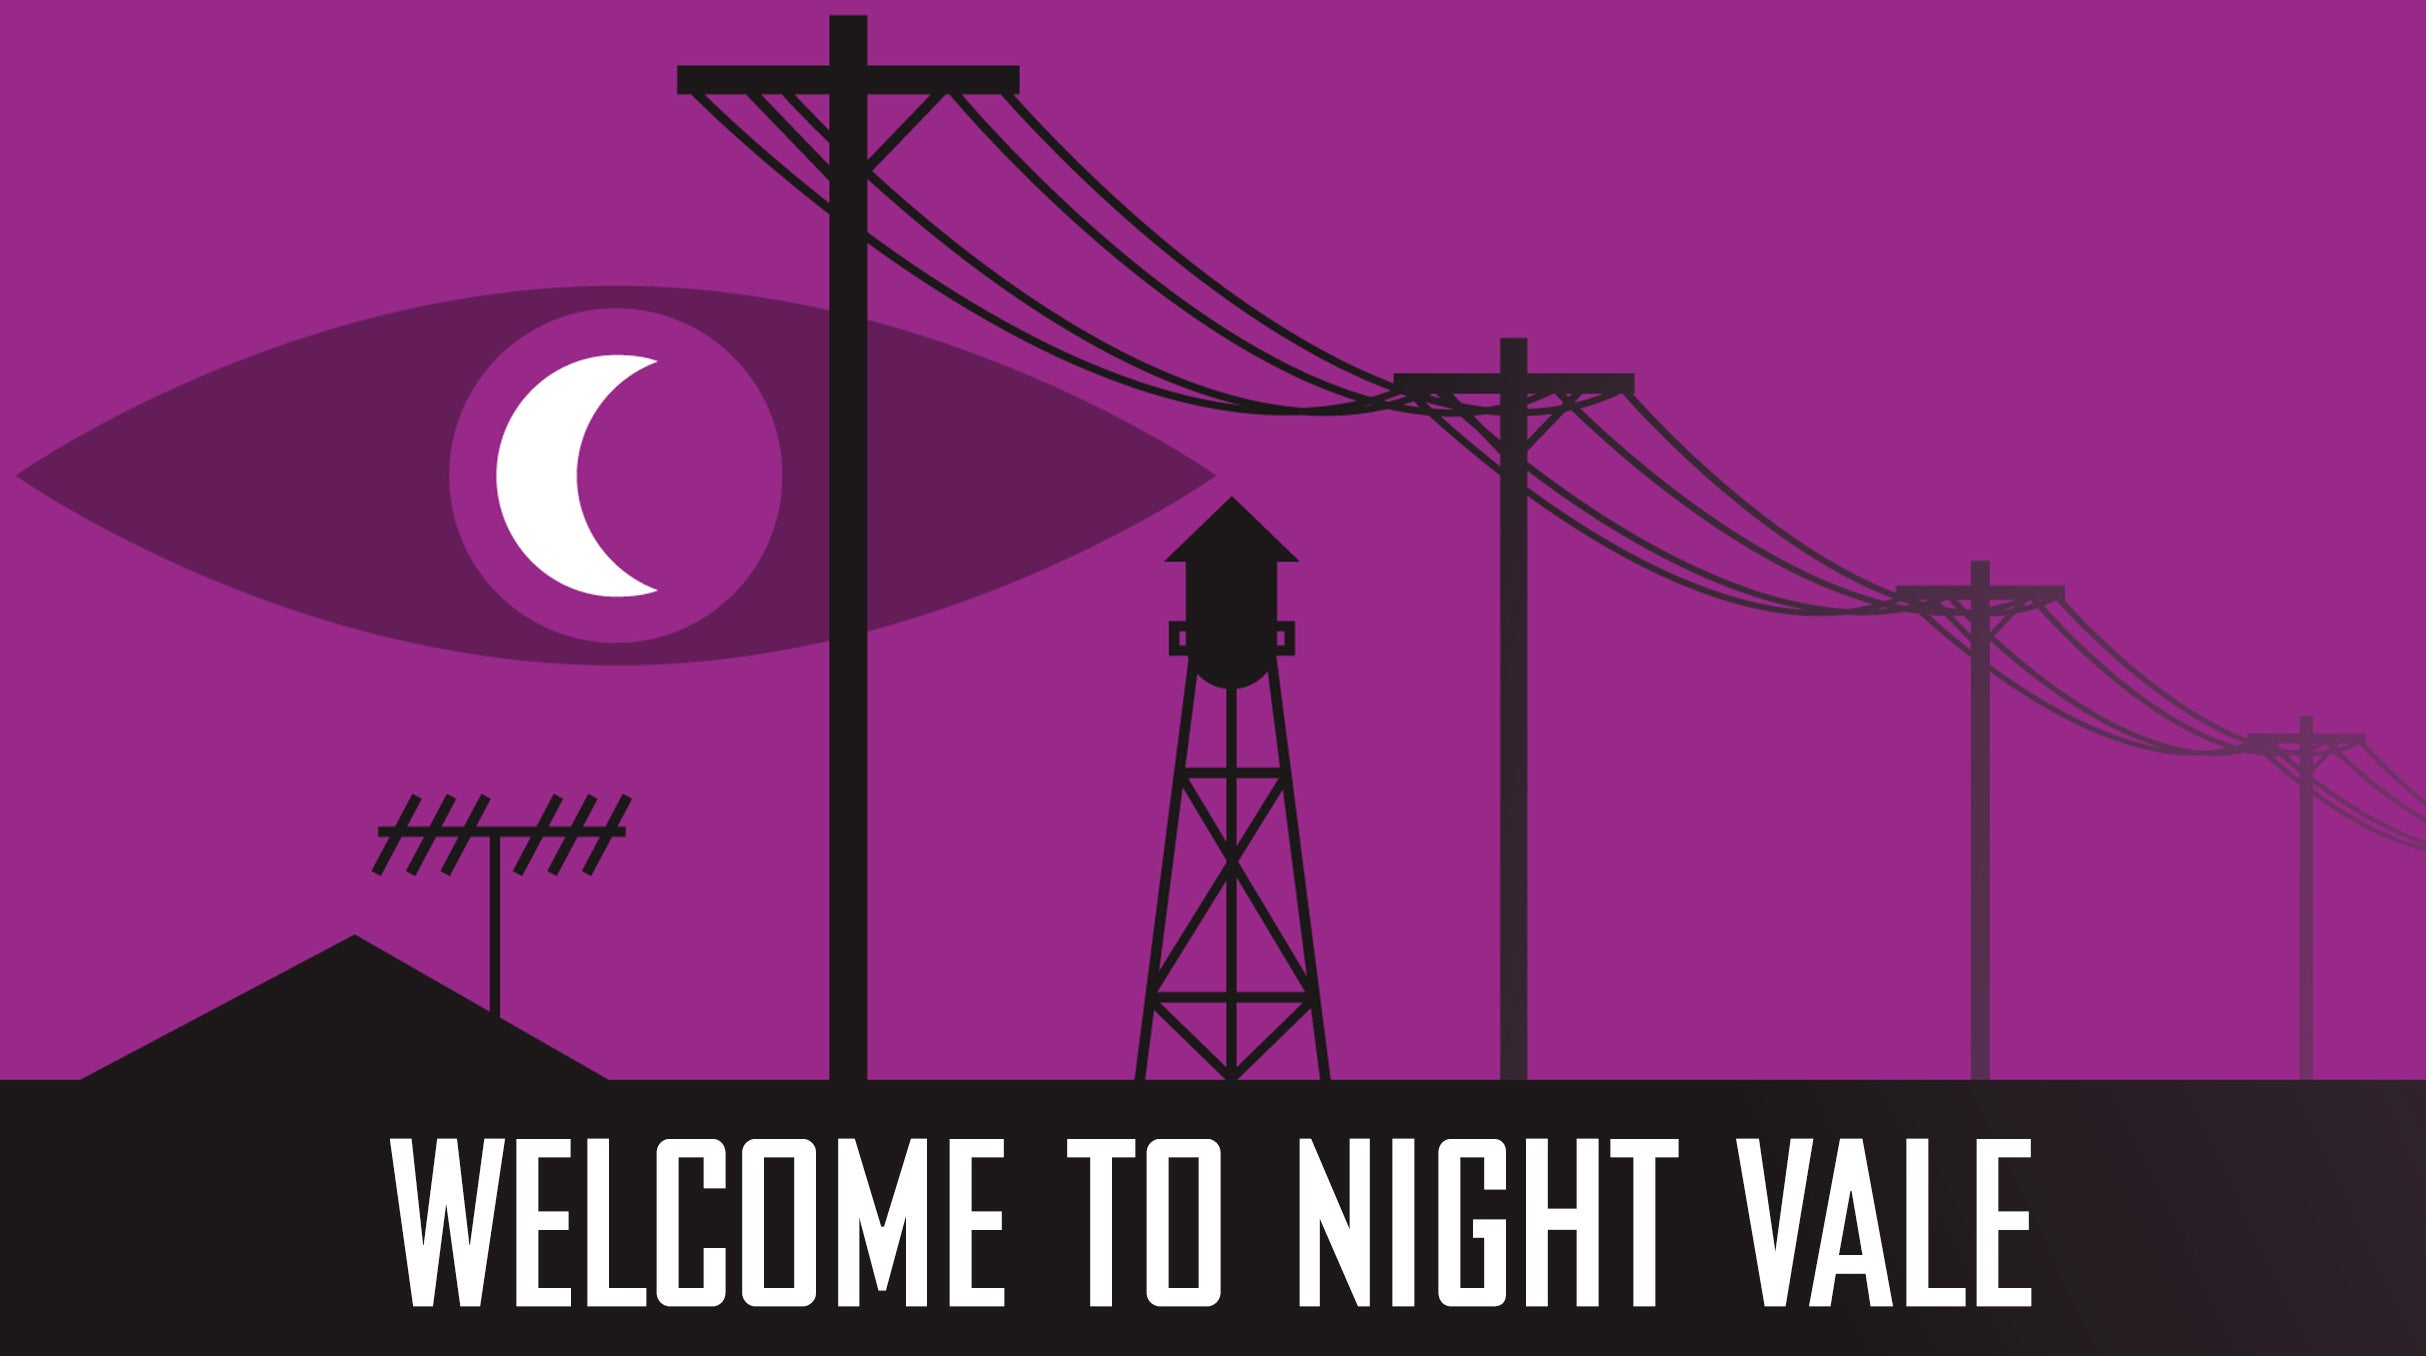 Welcome To Night Vale at White Eagle Hall